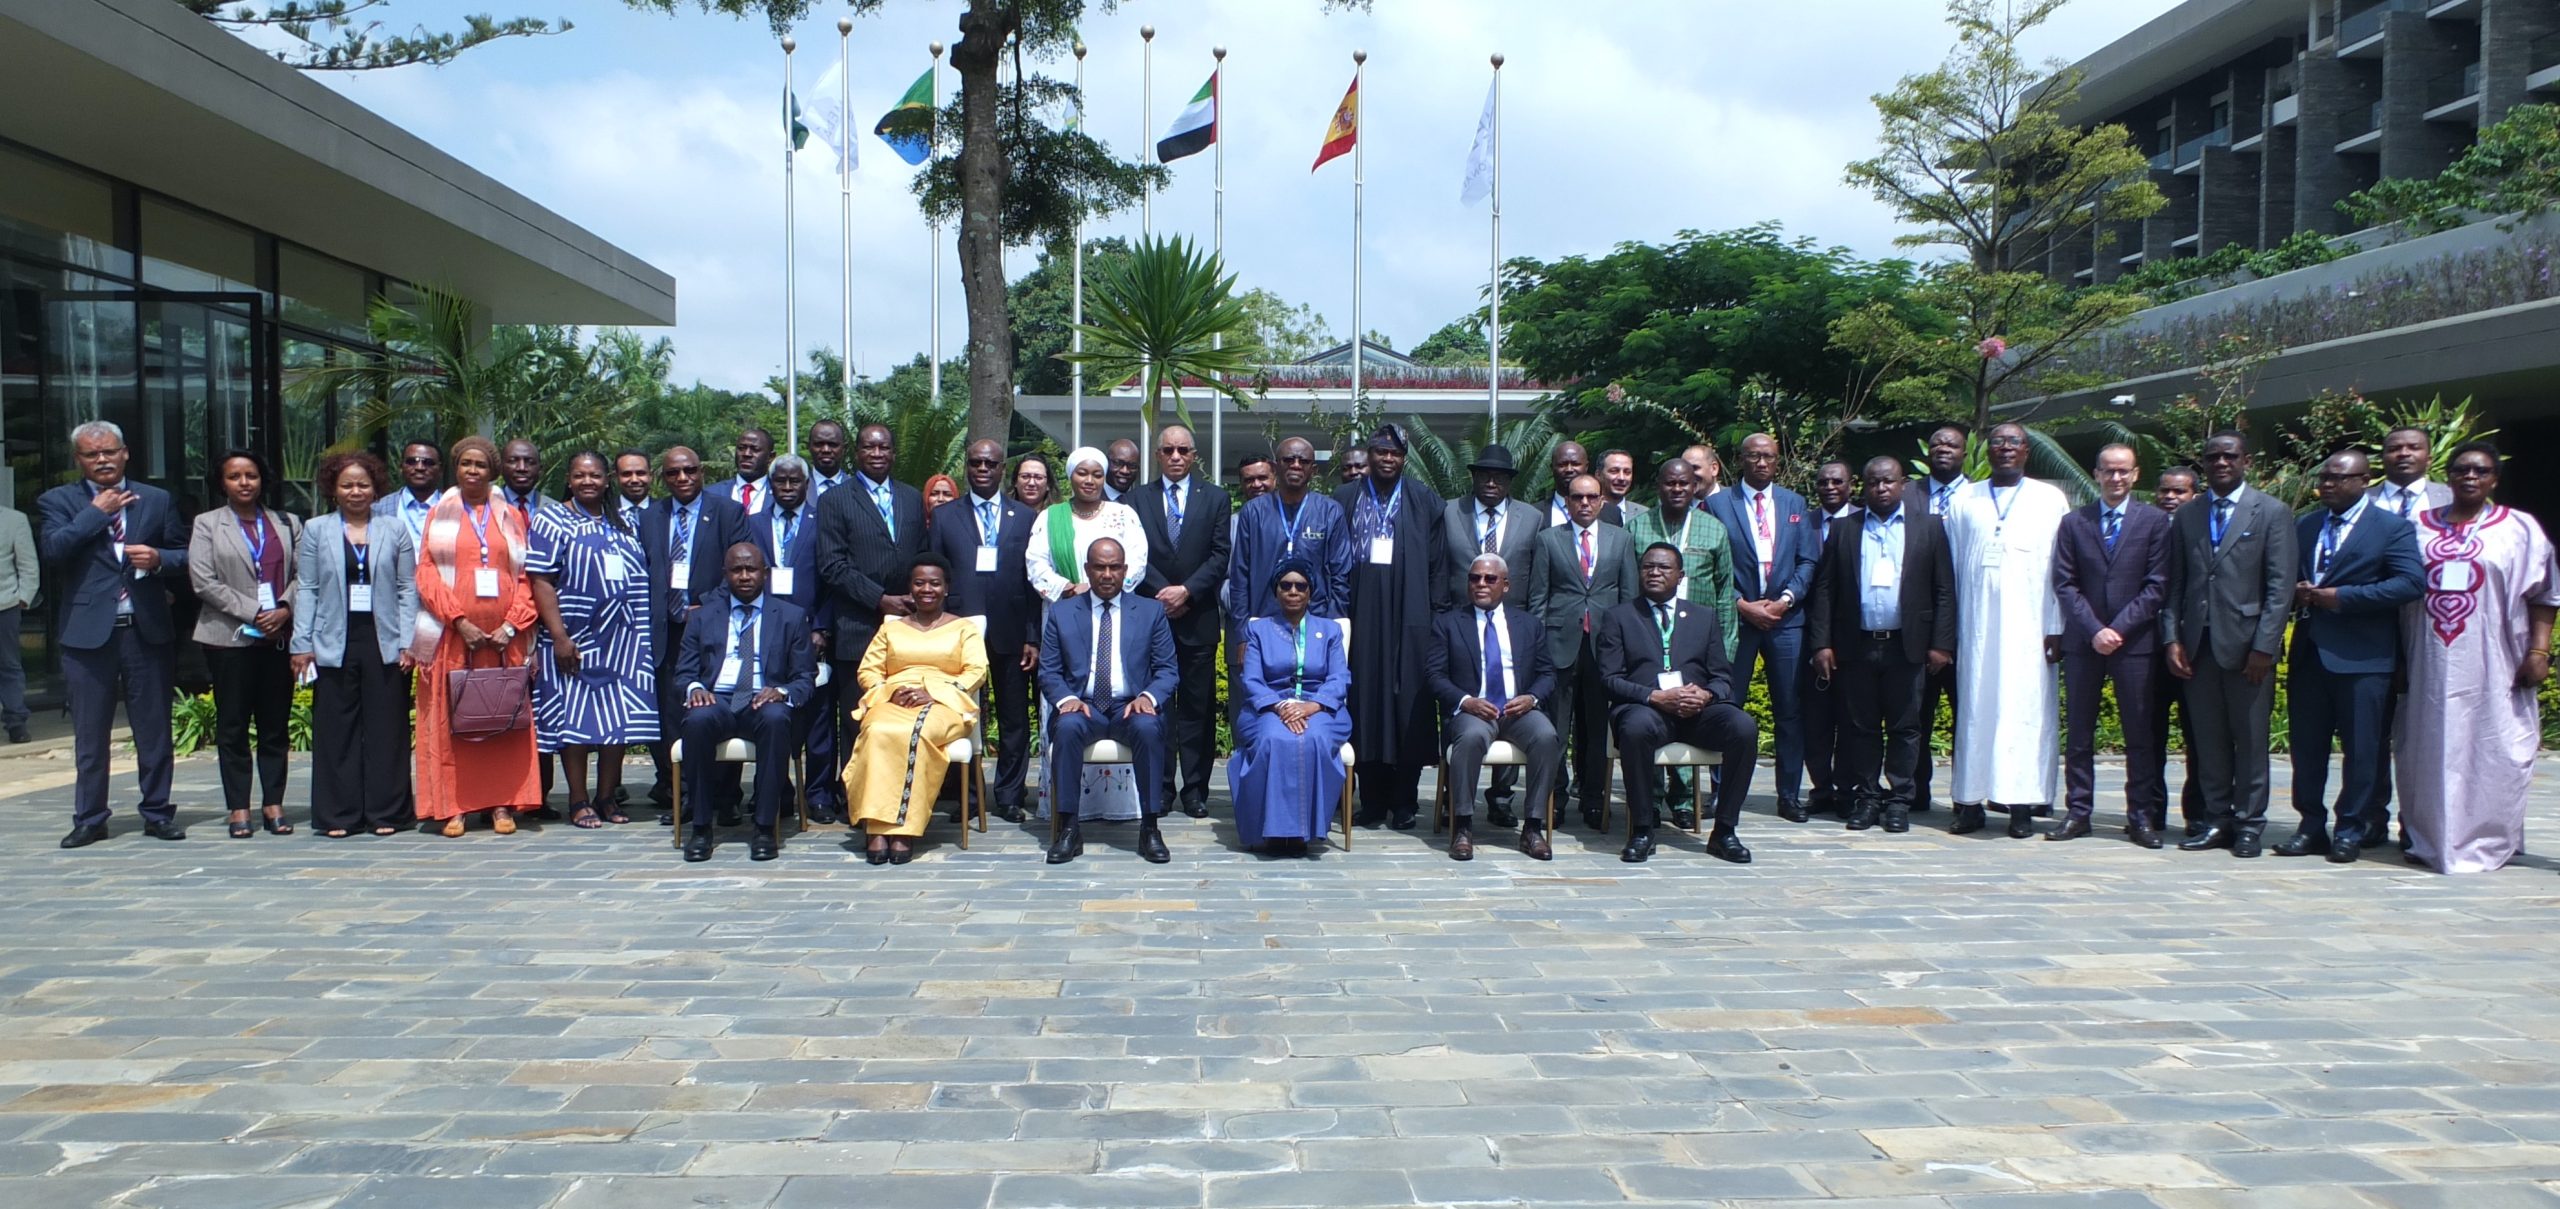 THE JOINT RETREAT OF THE AFRICAN COURT AND THE PERMANENT REPRESENTATIVES TO THE AU STARTS IN ARUSHA￼